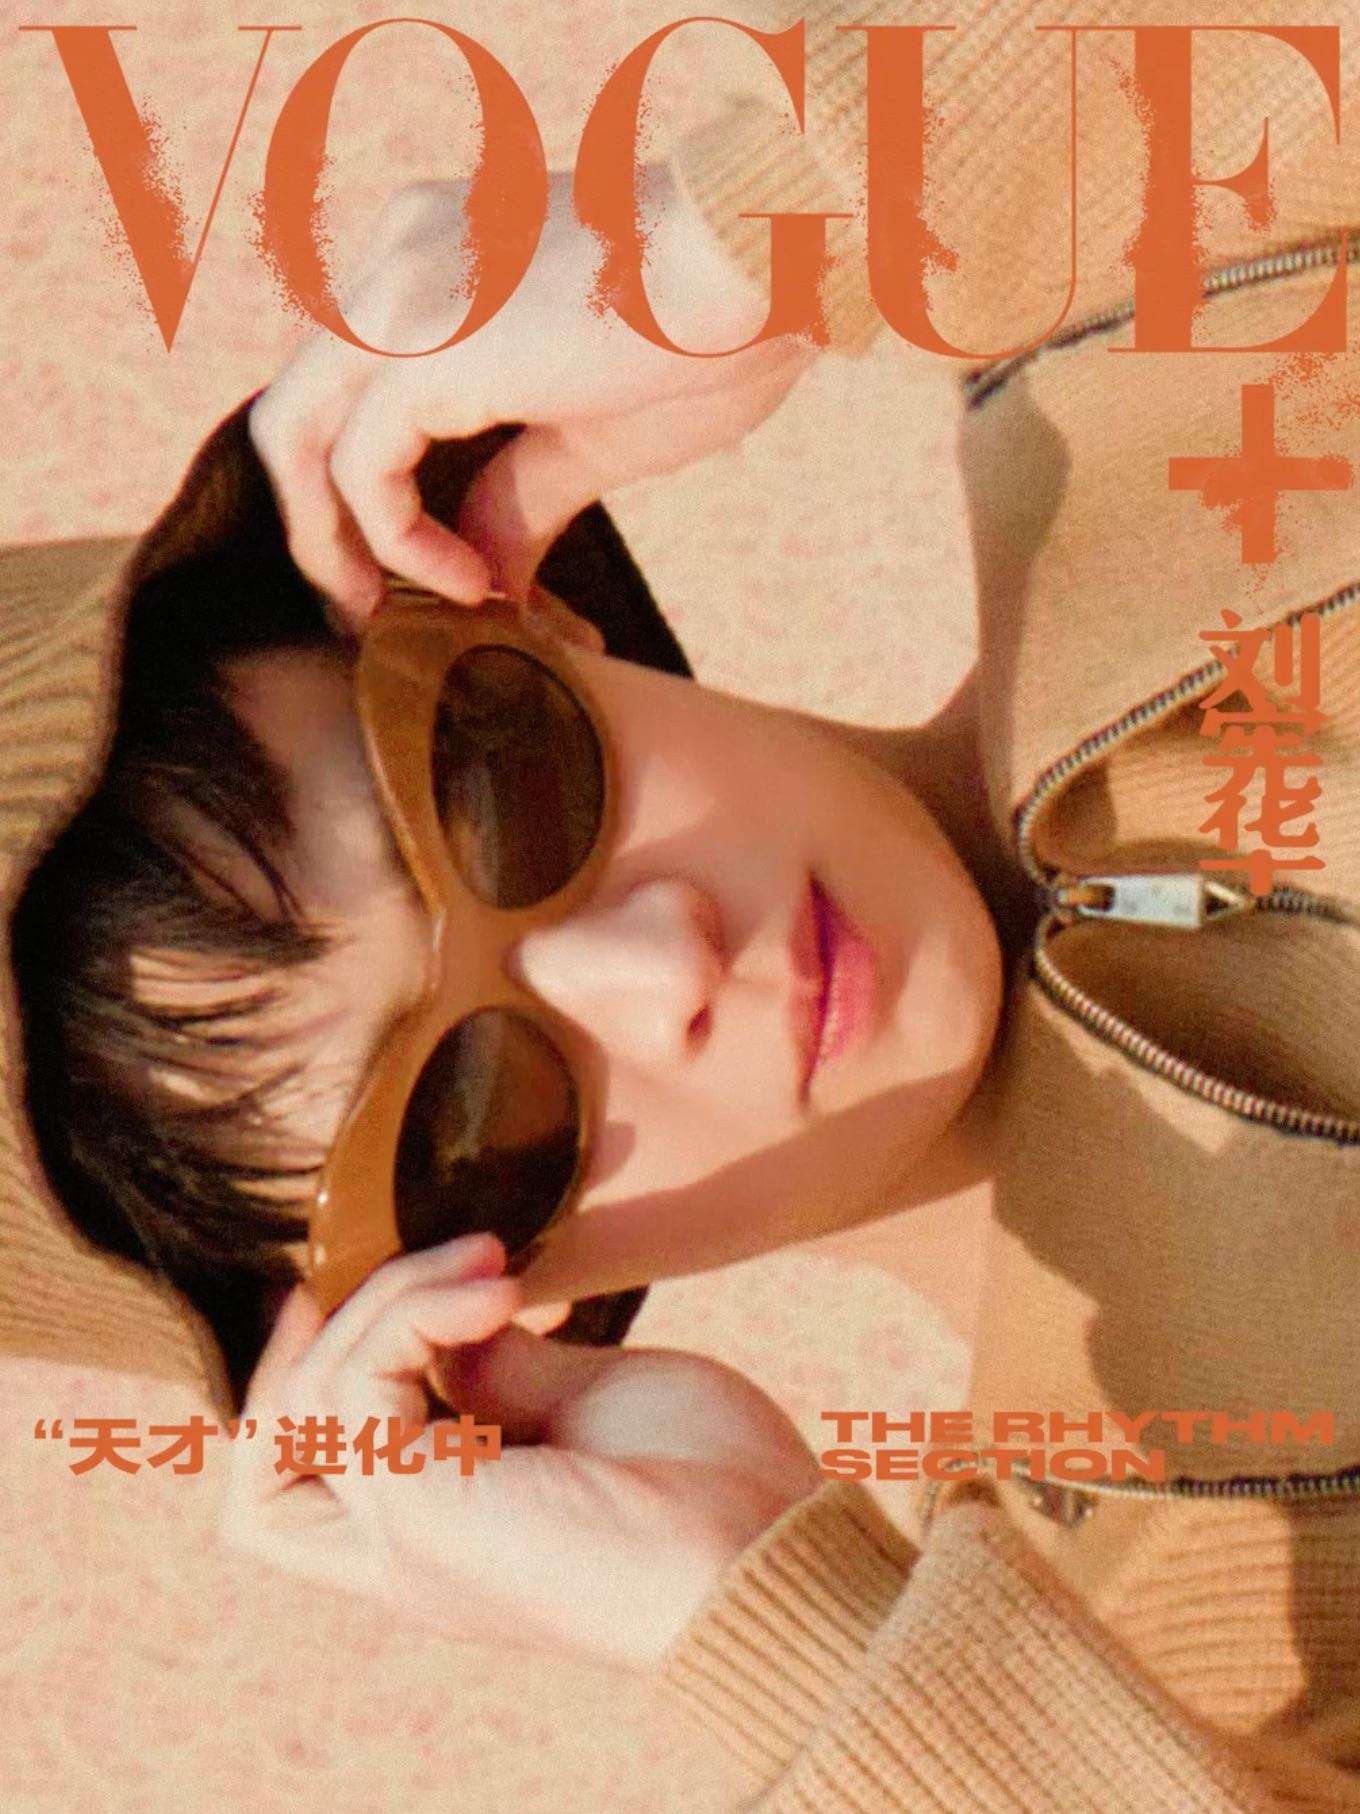 VOGUE+_HENRY_二月刊_MOVING COVER